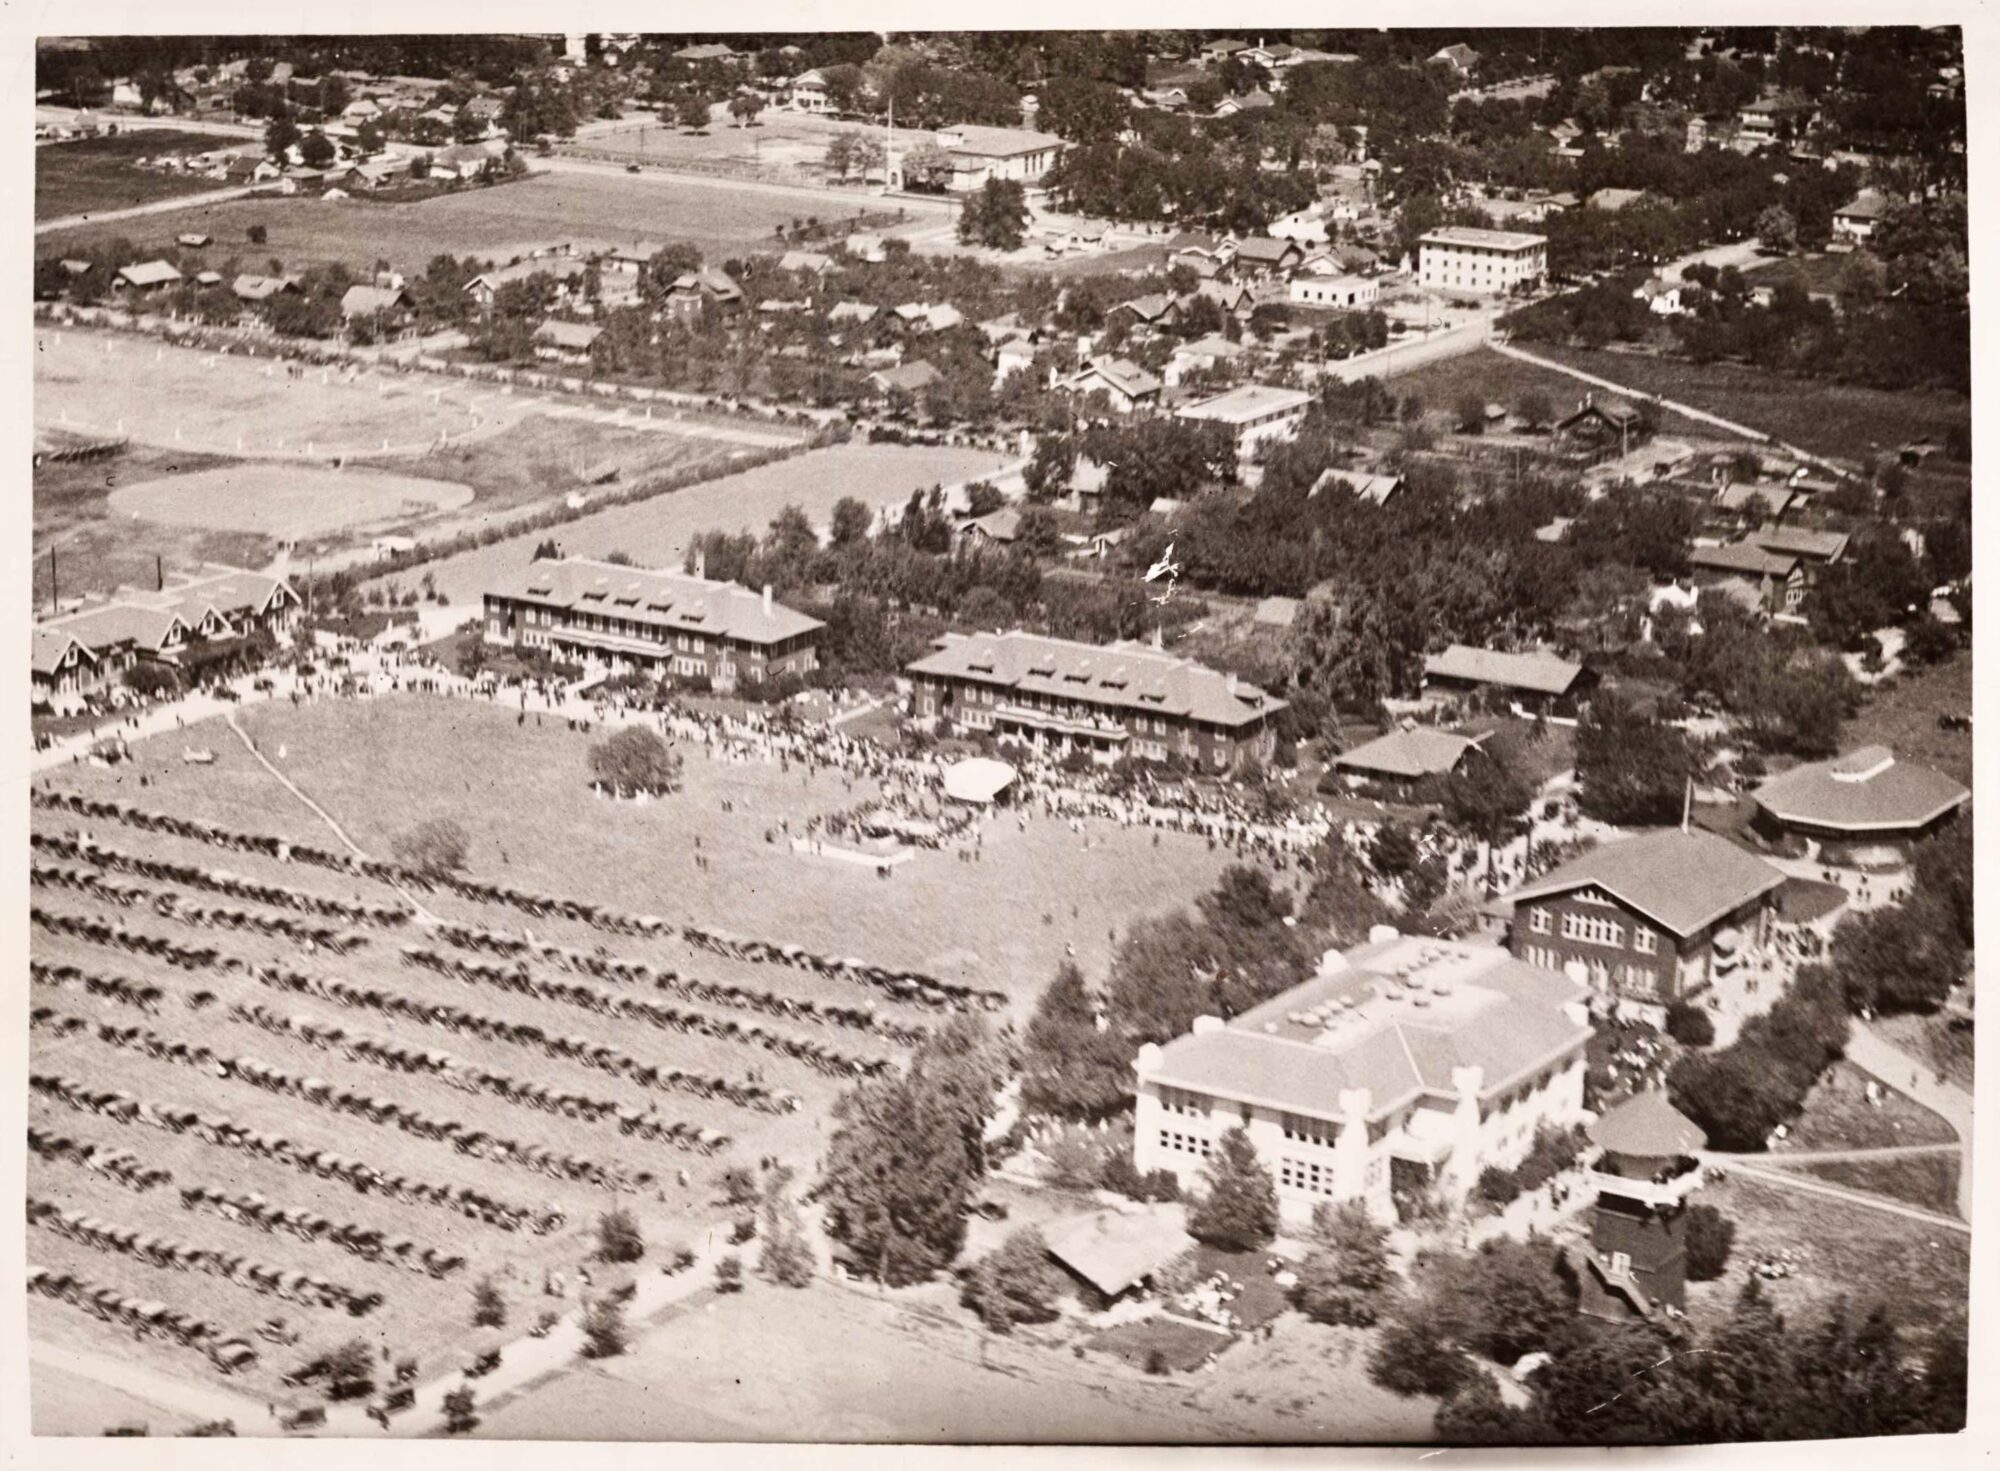 Aerial photograph of UC Davis campus showing Quad and early buildings